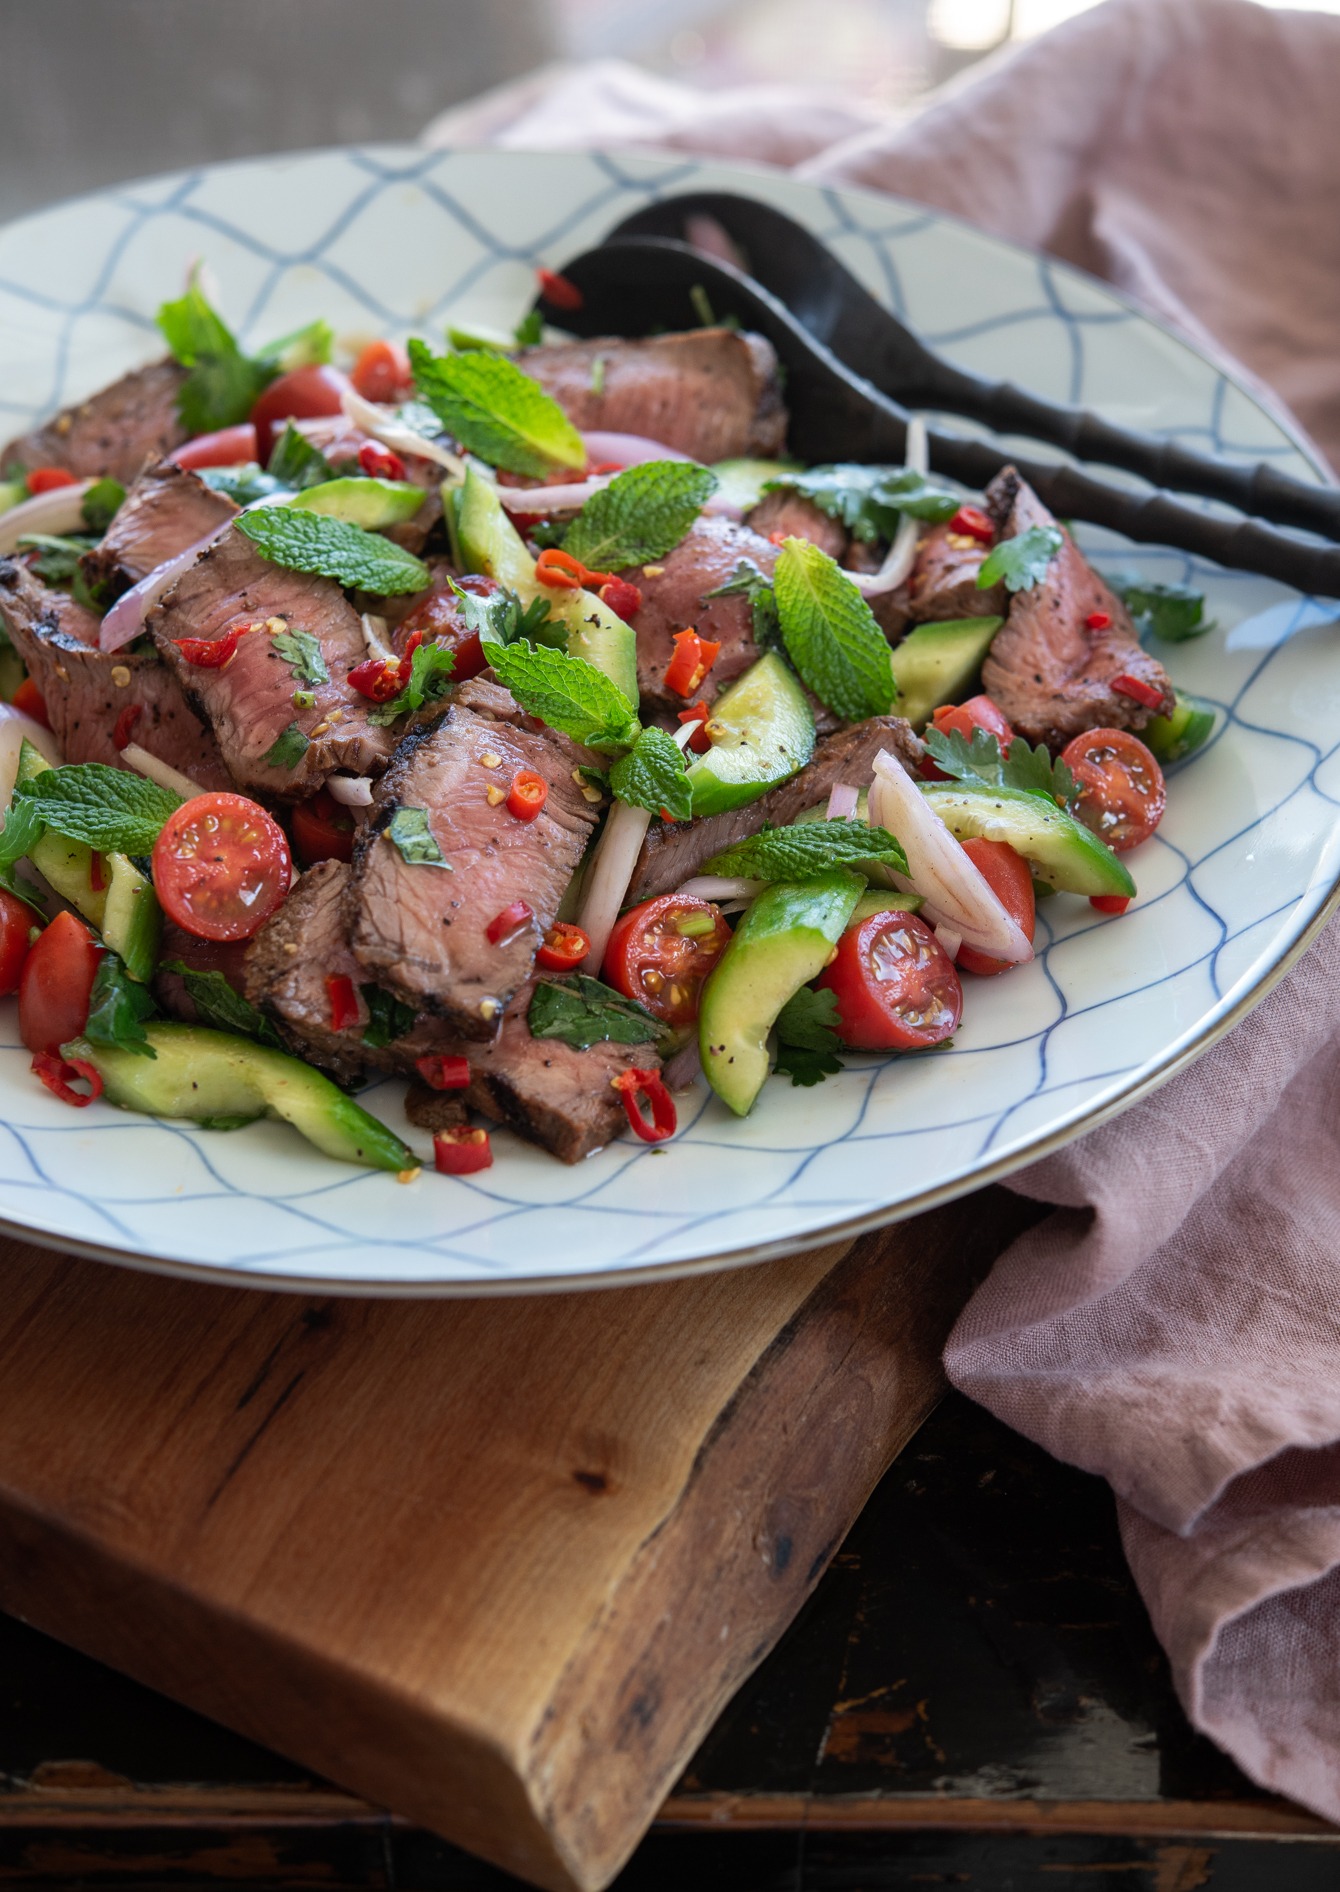 A large serving plate of Thai beef salad (Yum Nua) with cucumber and tomato garnished with herbs.